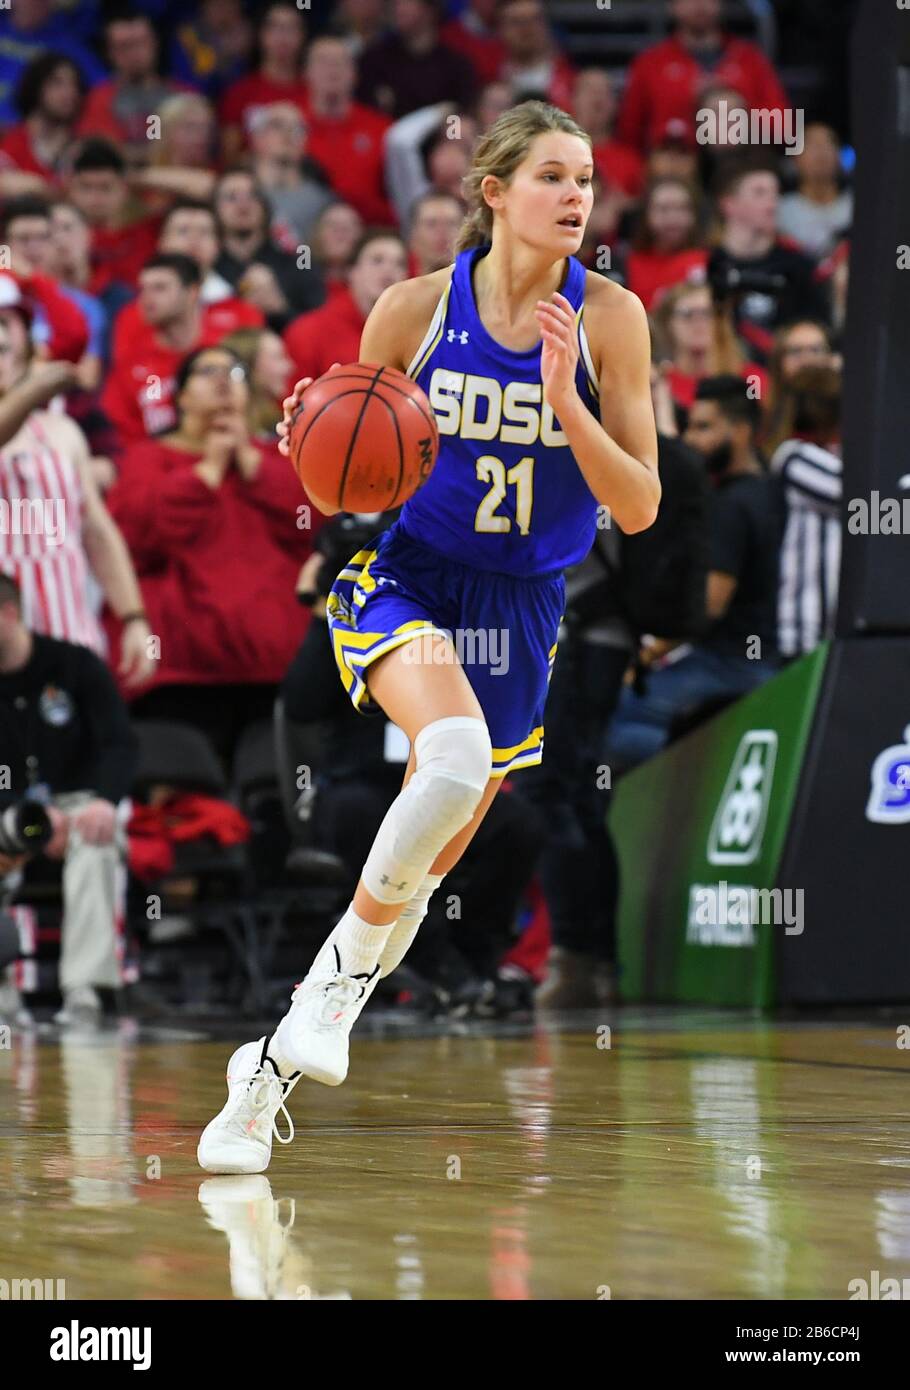 March 10, 2020: South Dakota State Jackrabbits guard Tylee Irwin (21) brings the ball up the court during the Summit League women's championship basketball game between the South Dakota State Jackrabbits and the South Dakota Coyotes at the Denny Sanford Premier Center, Sioux Falls, SD. South Dakota defeated South Dakota State 63-58 and move on to the NCAA tournament. Photo by Russell Hons/CSM Stock Photo